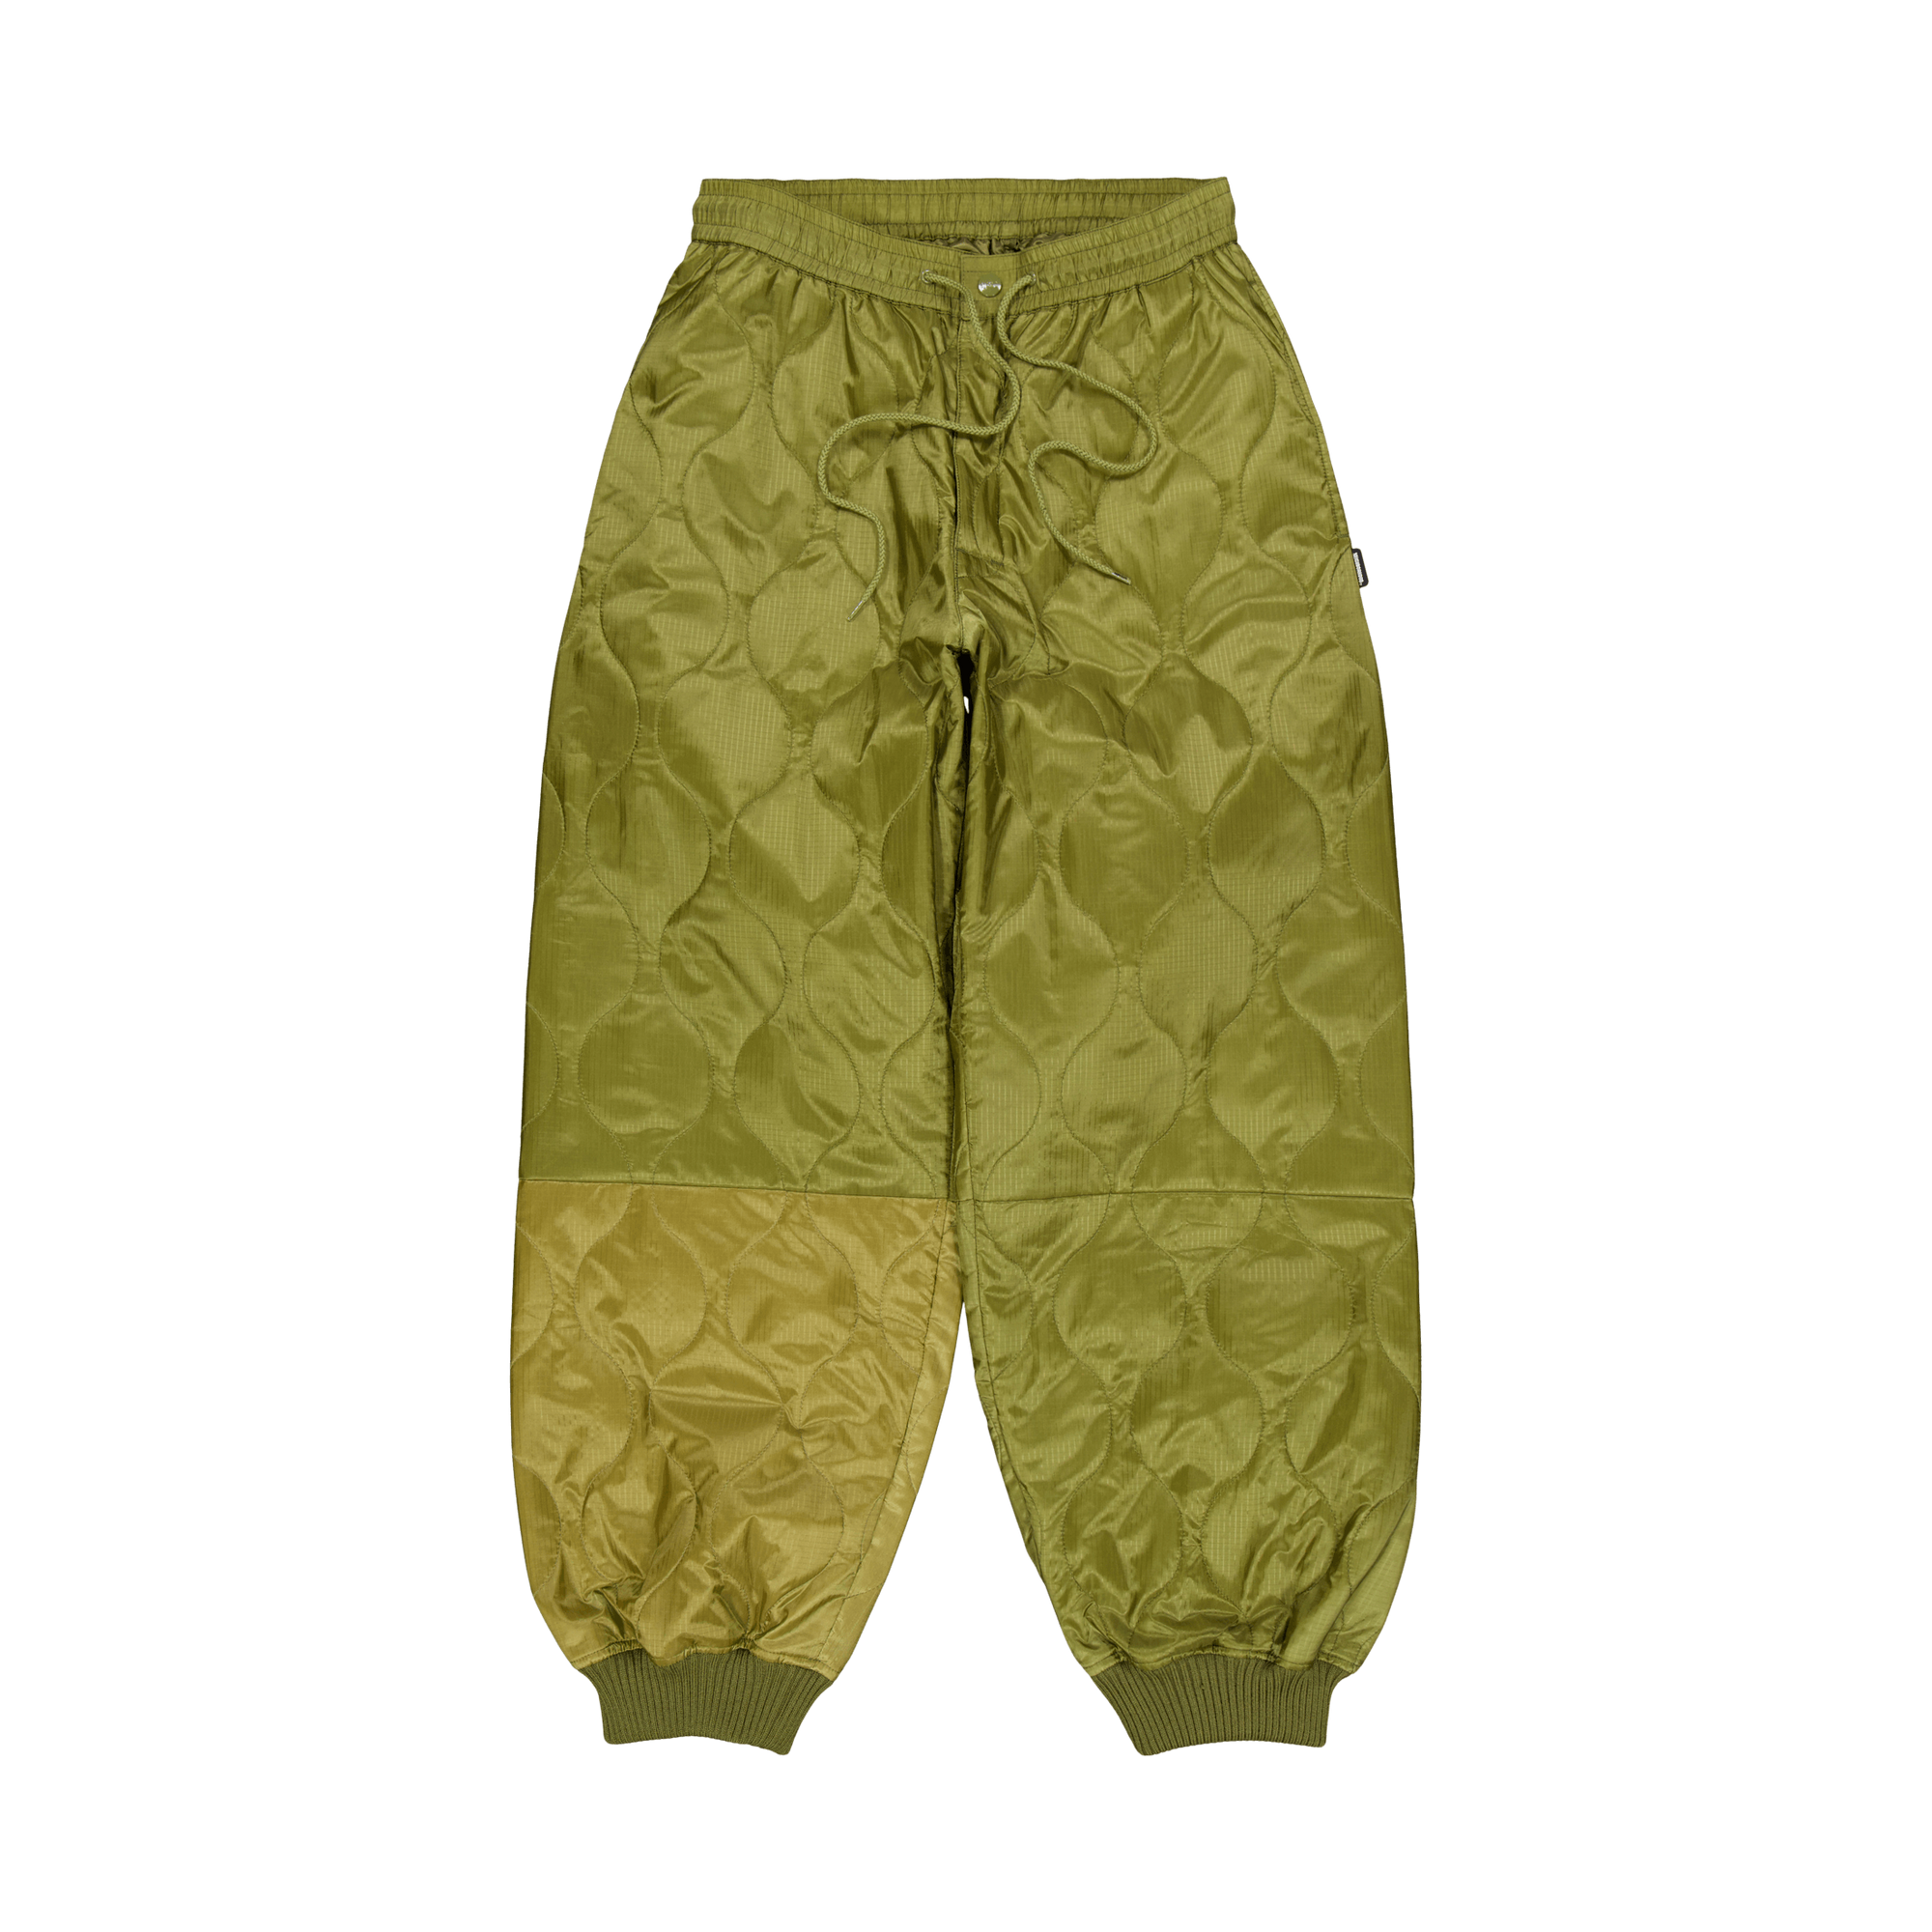 Quilting Pants Olive Drab